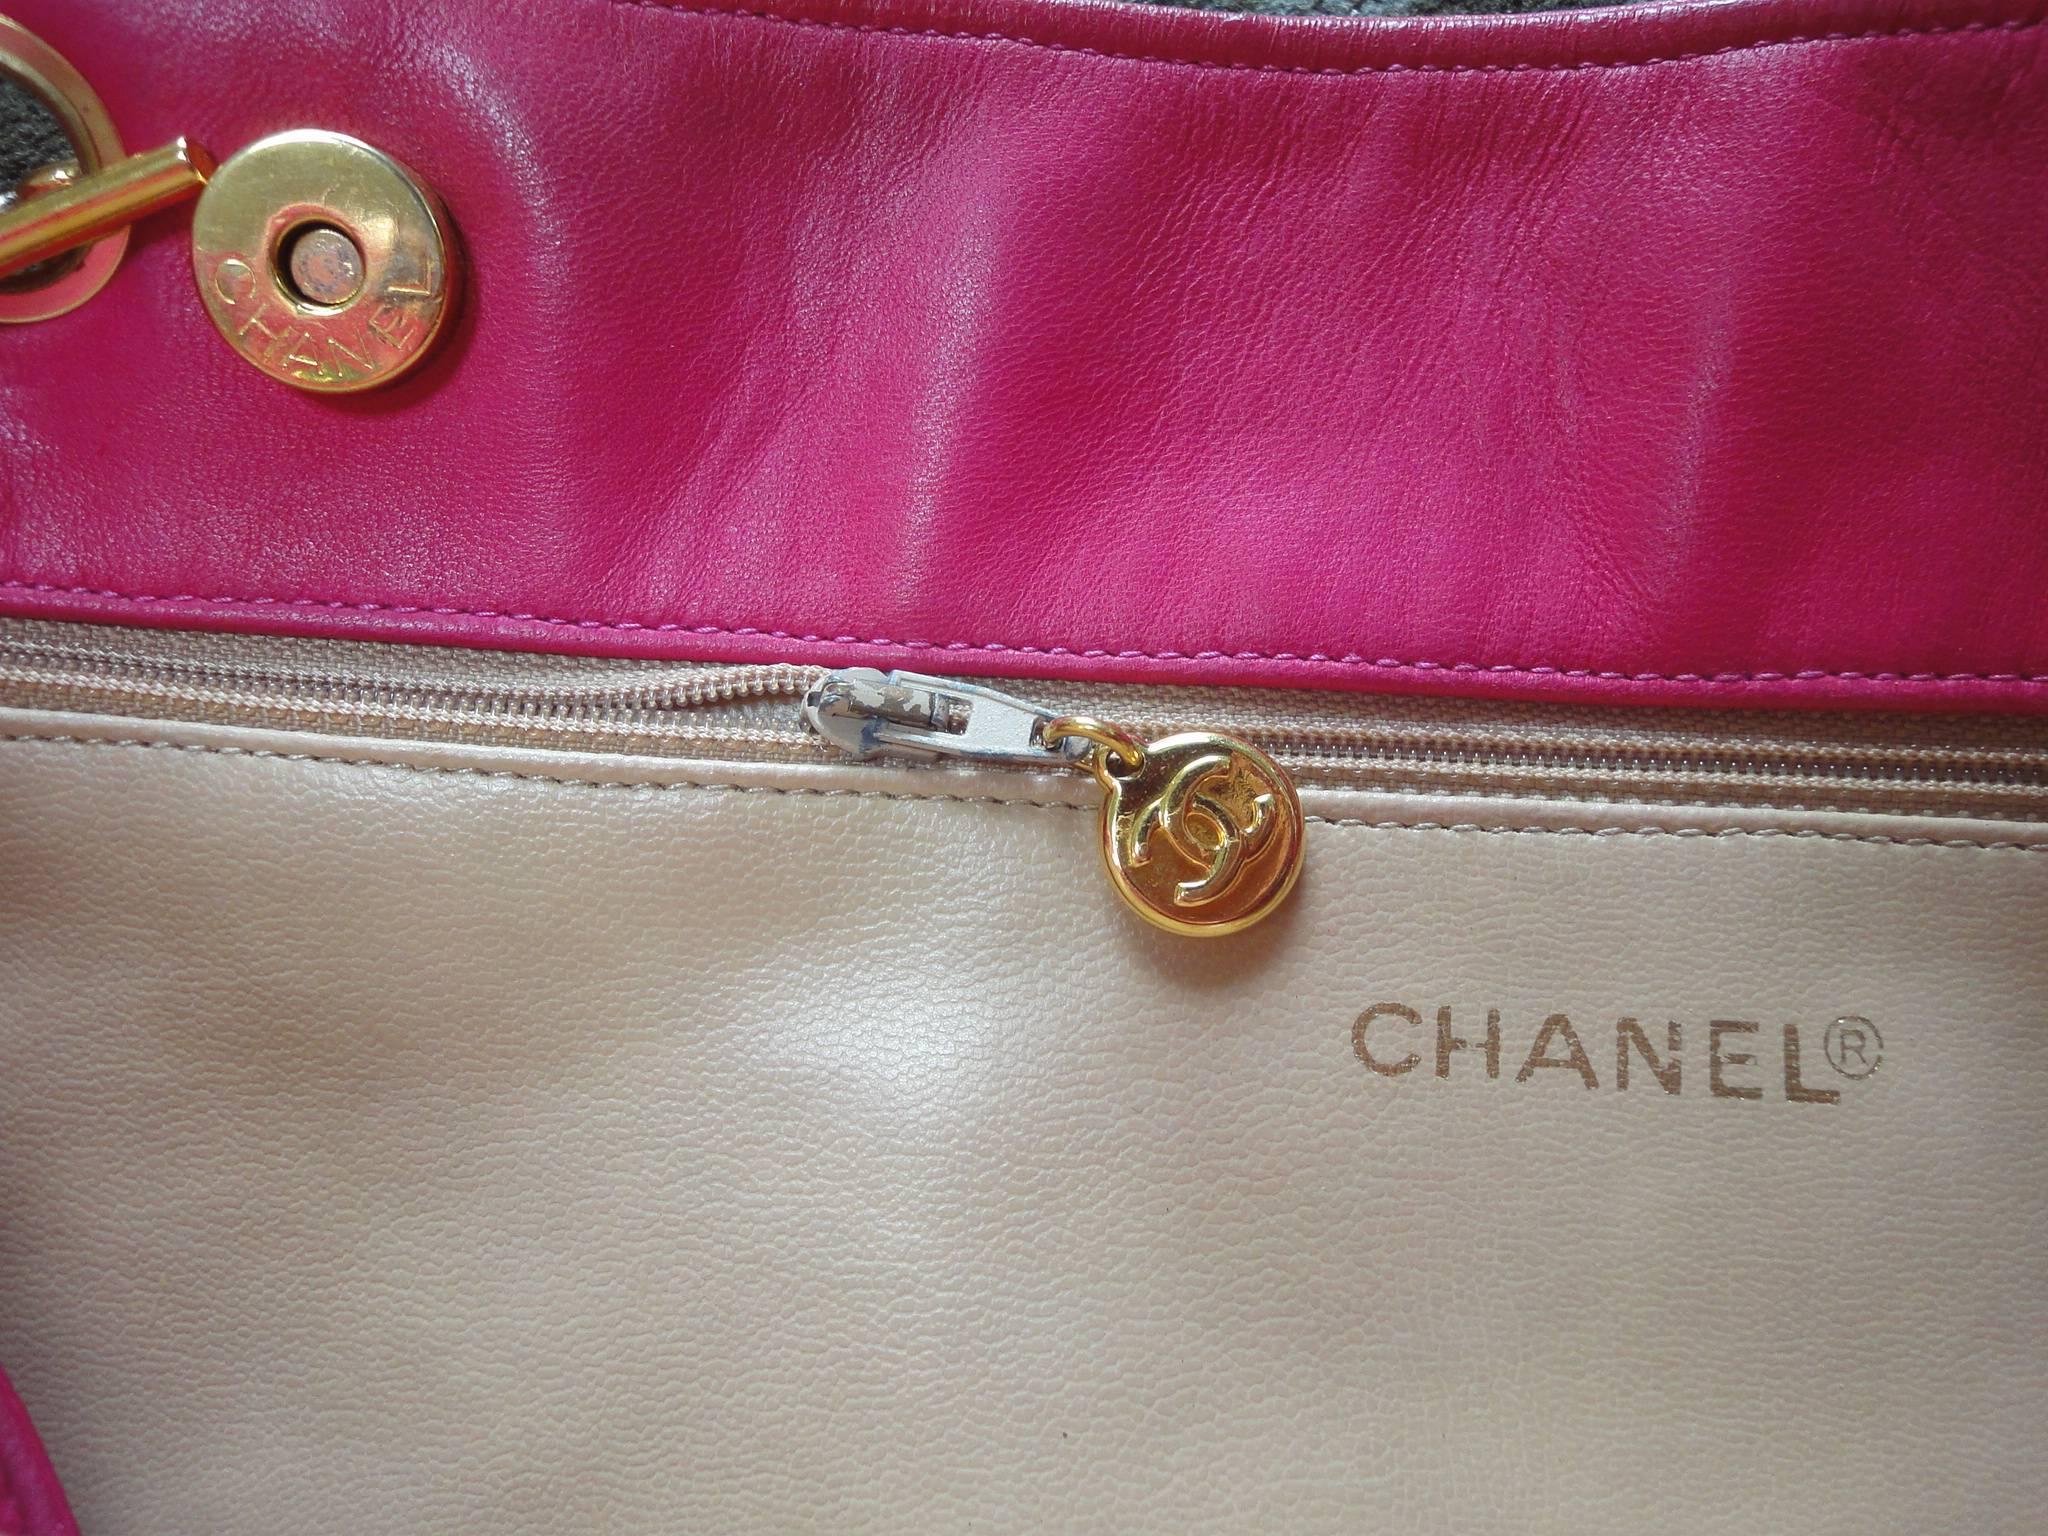 Vintage CHANEL bright pink shoulder tote bag with quilted satin and leather 2